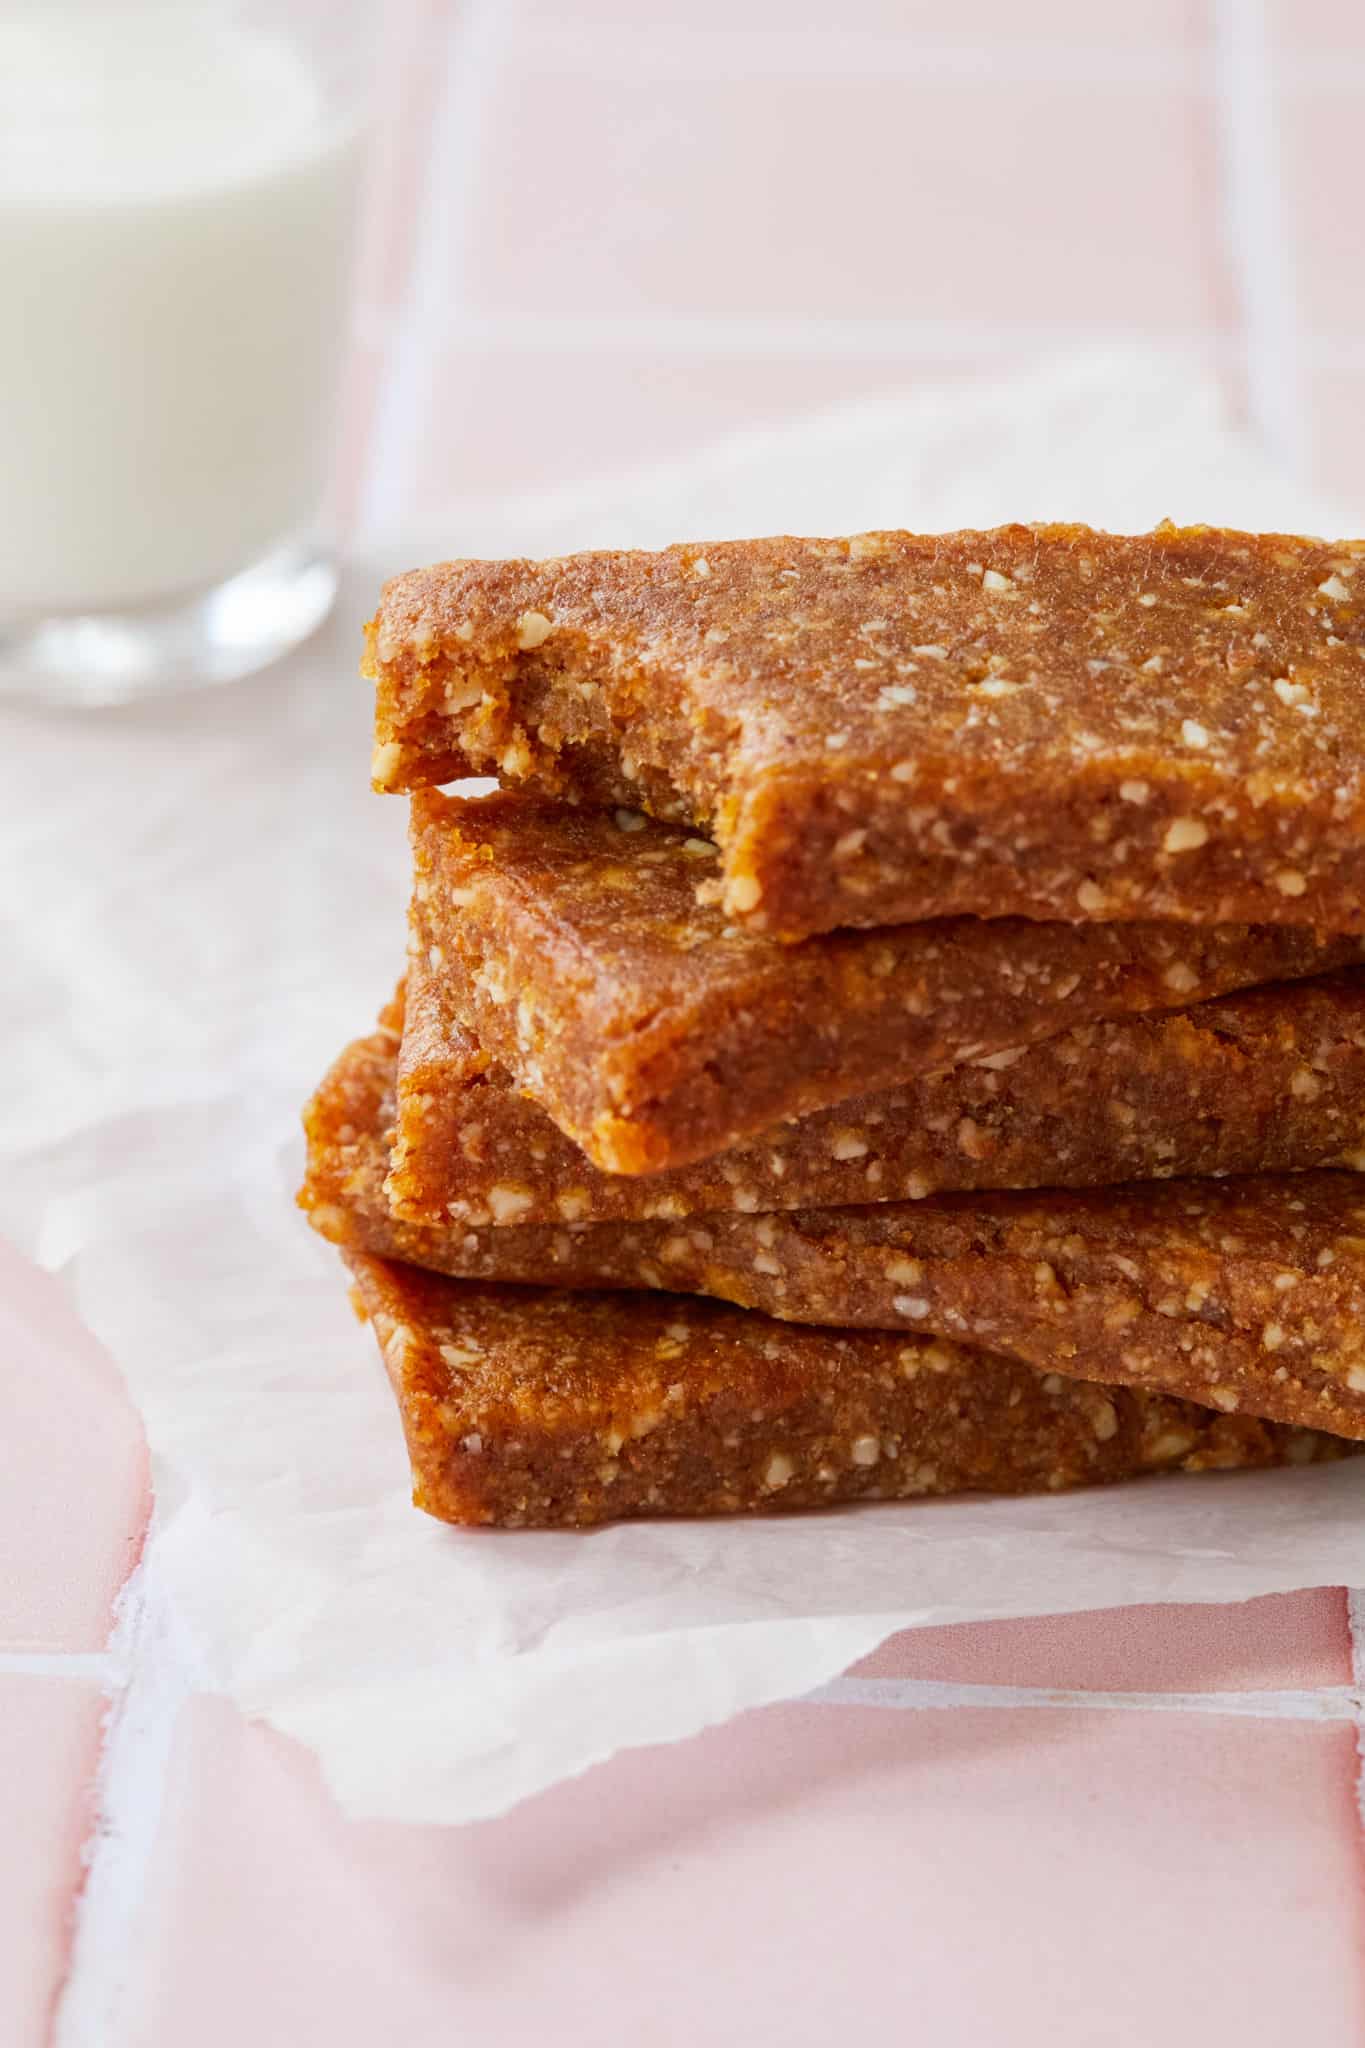 3 Ingredient homemade Larabars are stacked on a pink tile table with a single bite taken out of one.